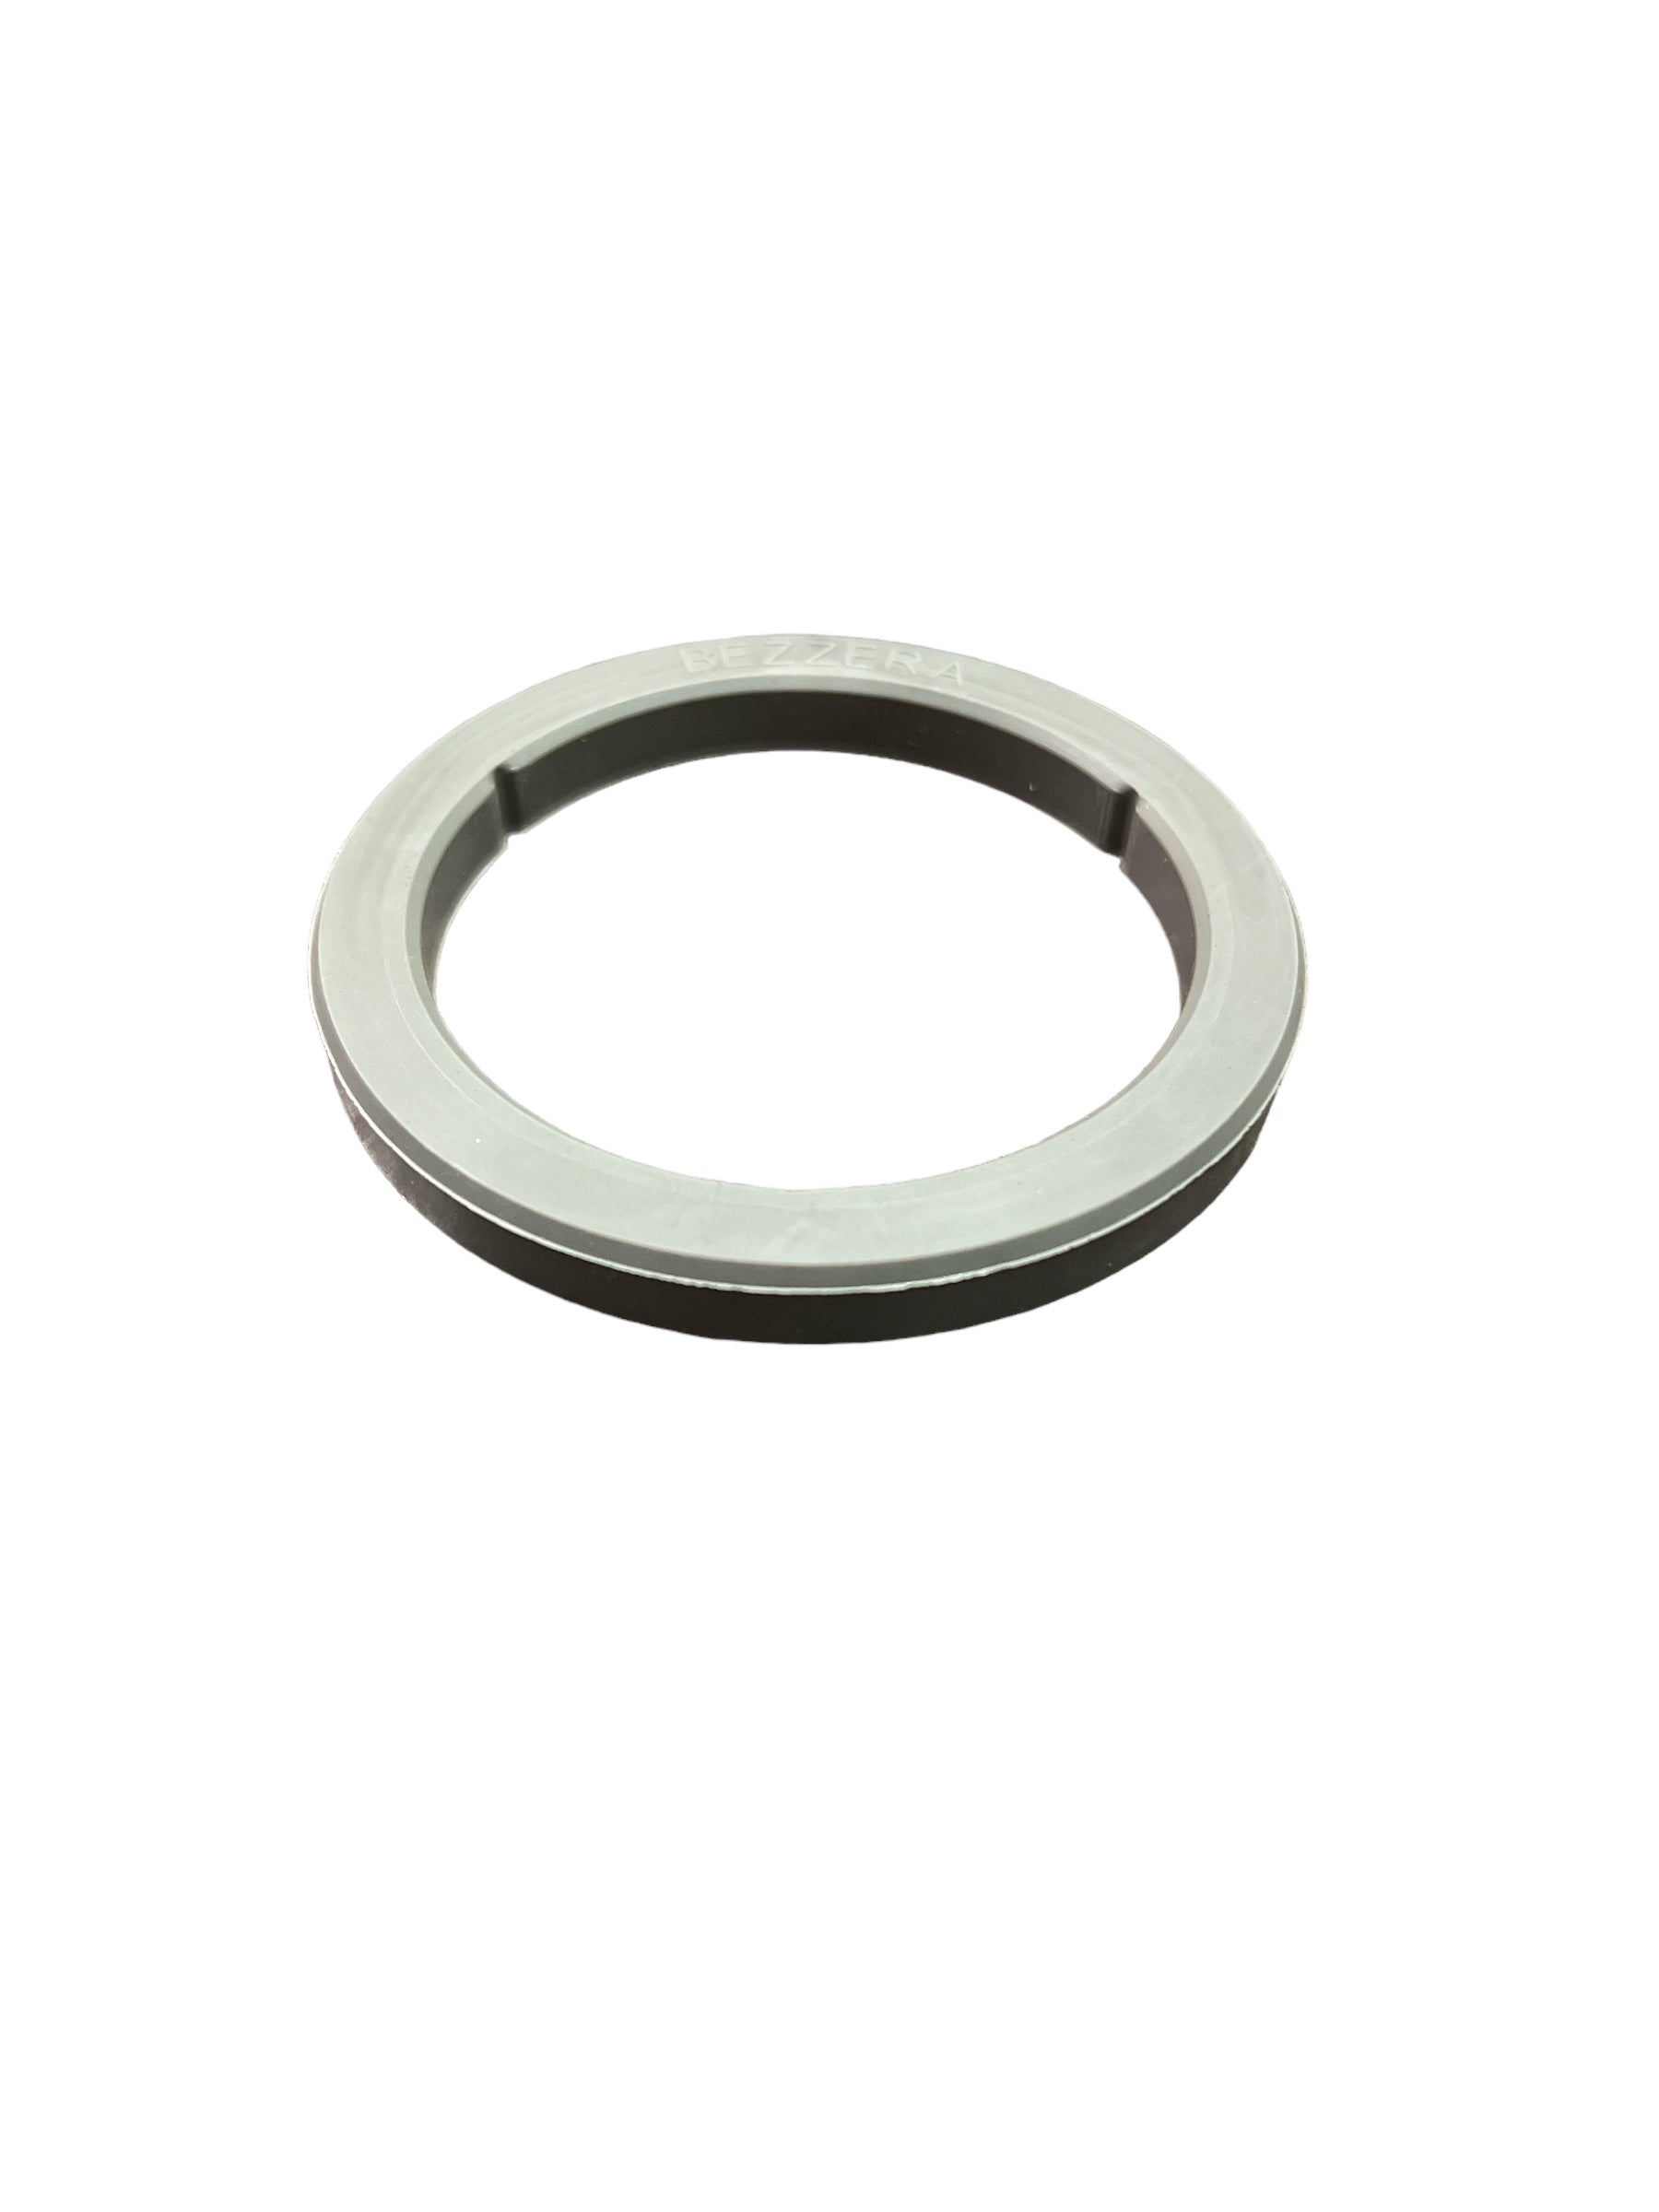 RBEZ5237 - GREY SILICONE GASKET FOR PROFESSIONAL MACHINES